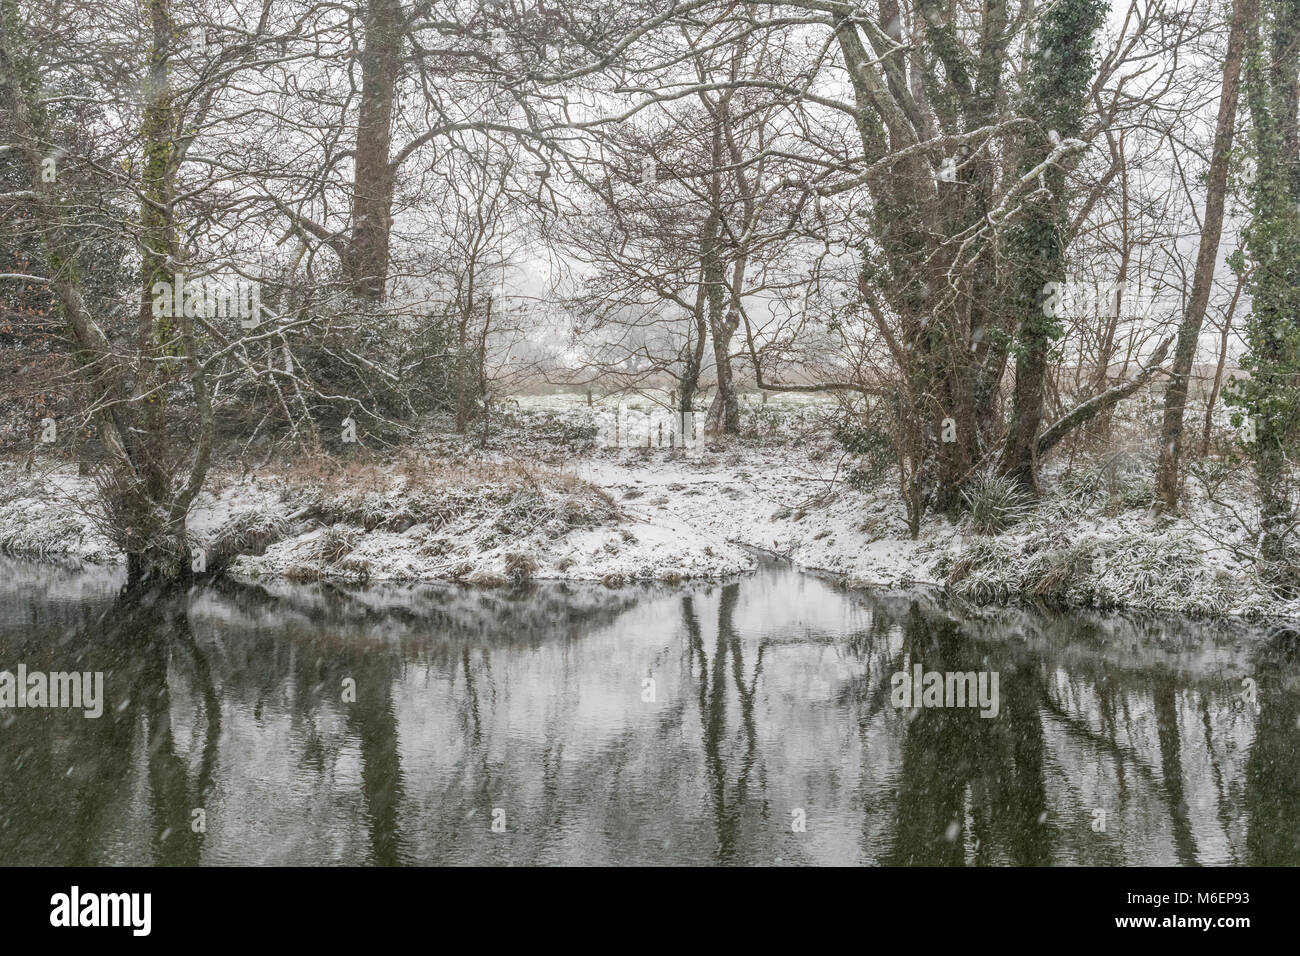 Snow dusted banks of the River Fowey at the Cornish town of Lostwithiel. Stock Photo